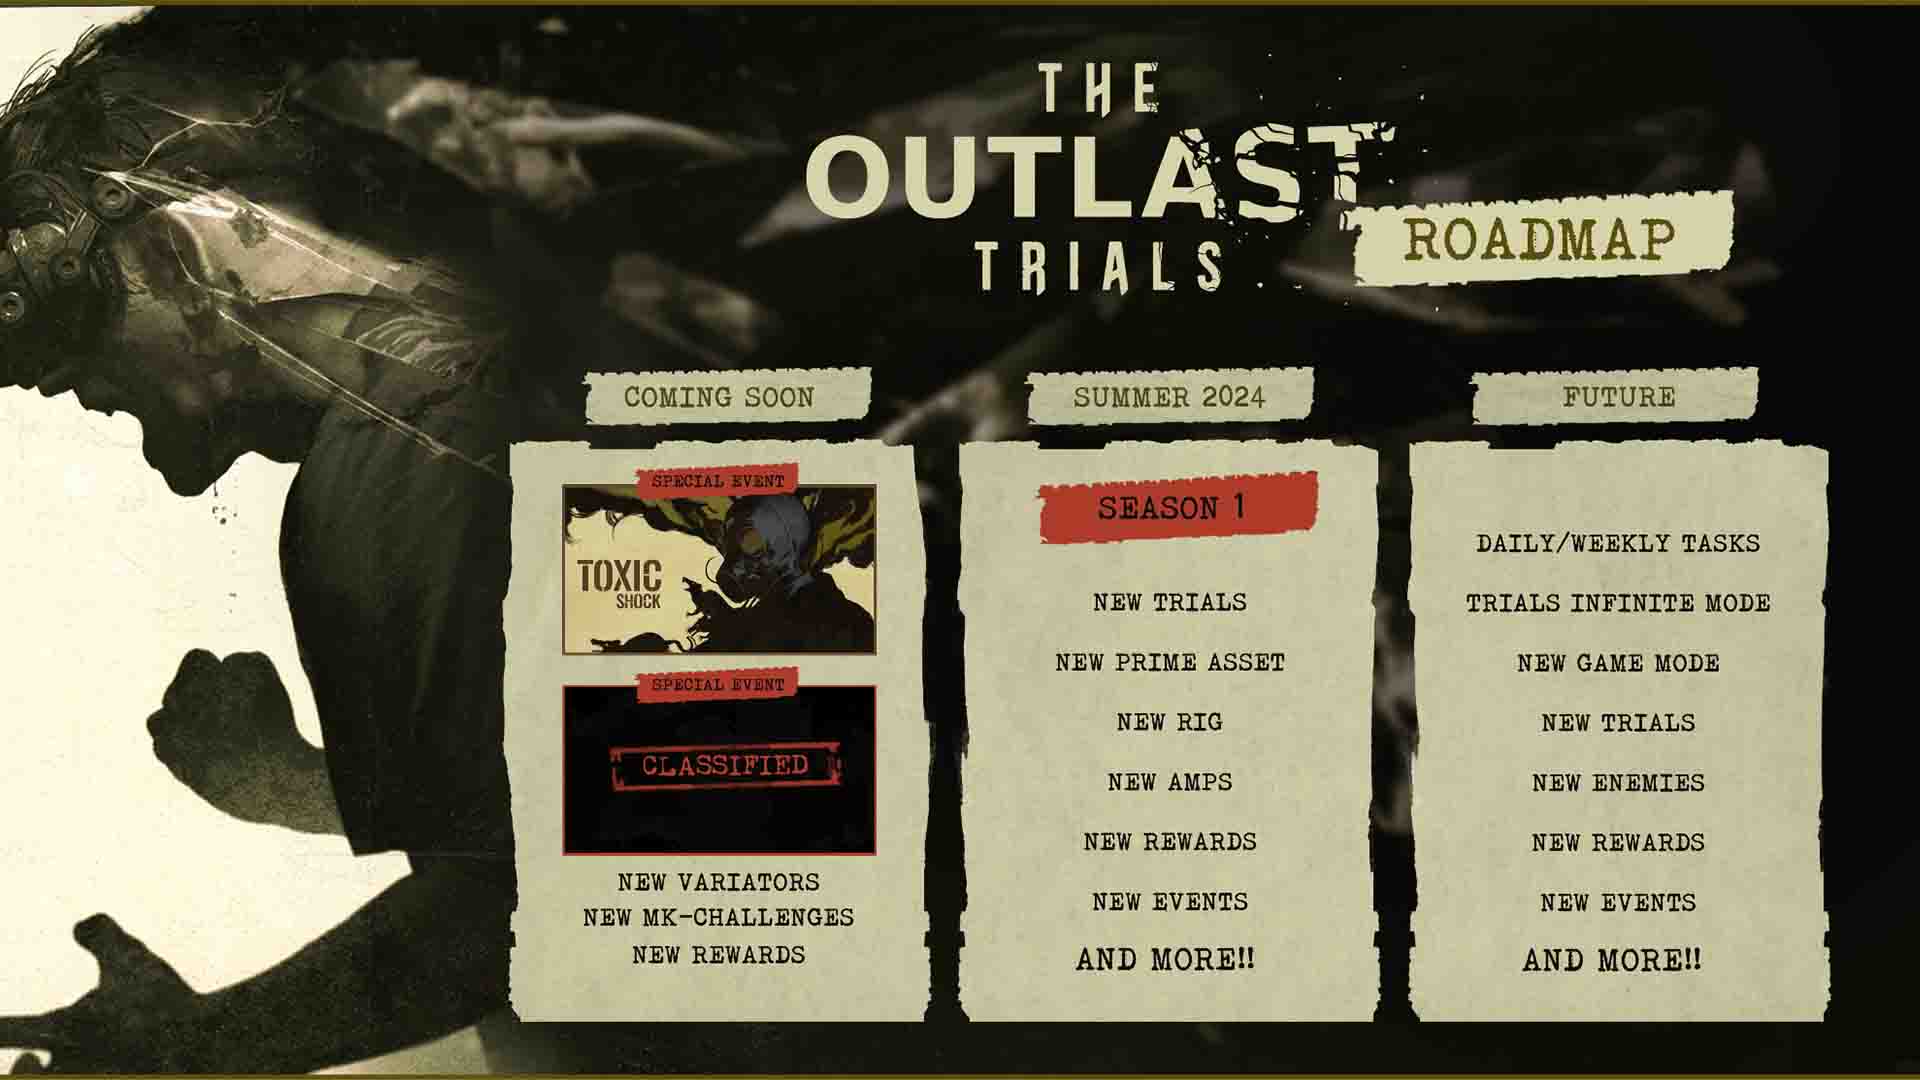 The Outlast Trials roadmap